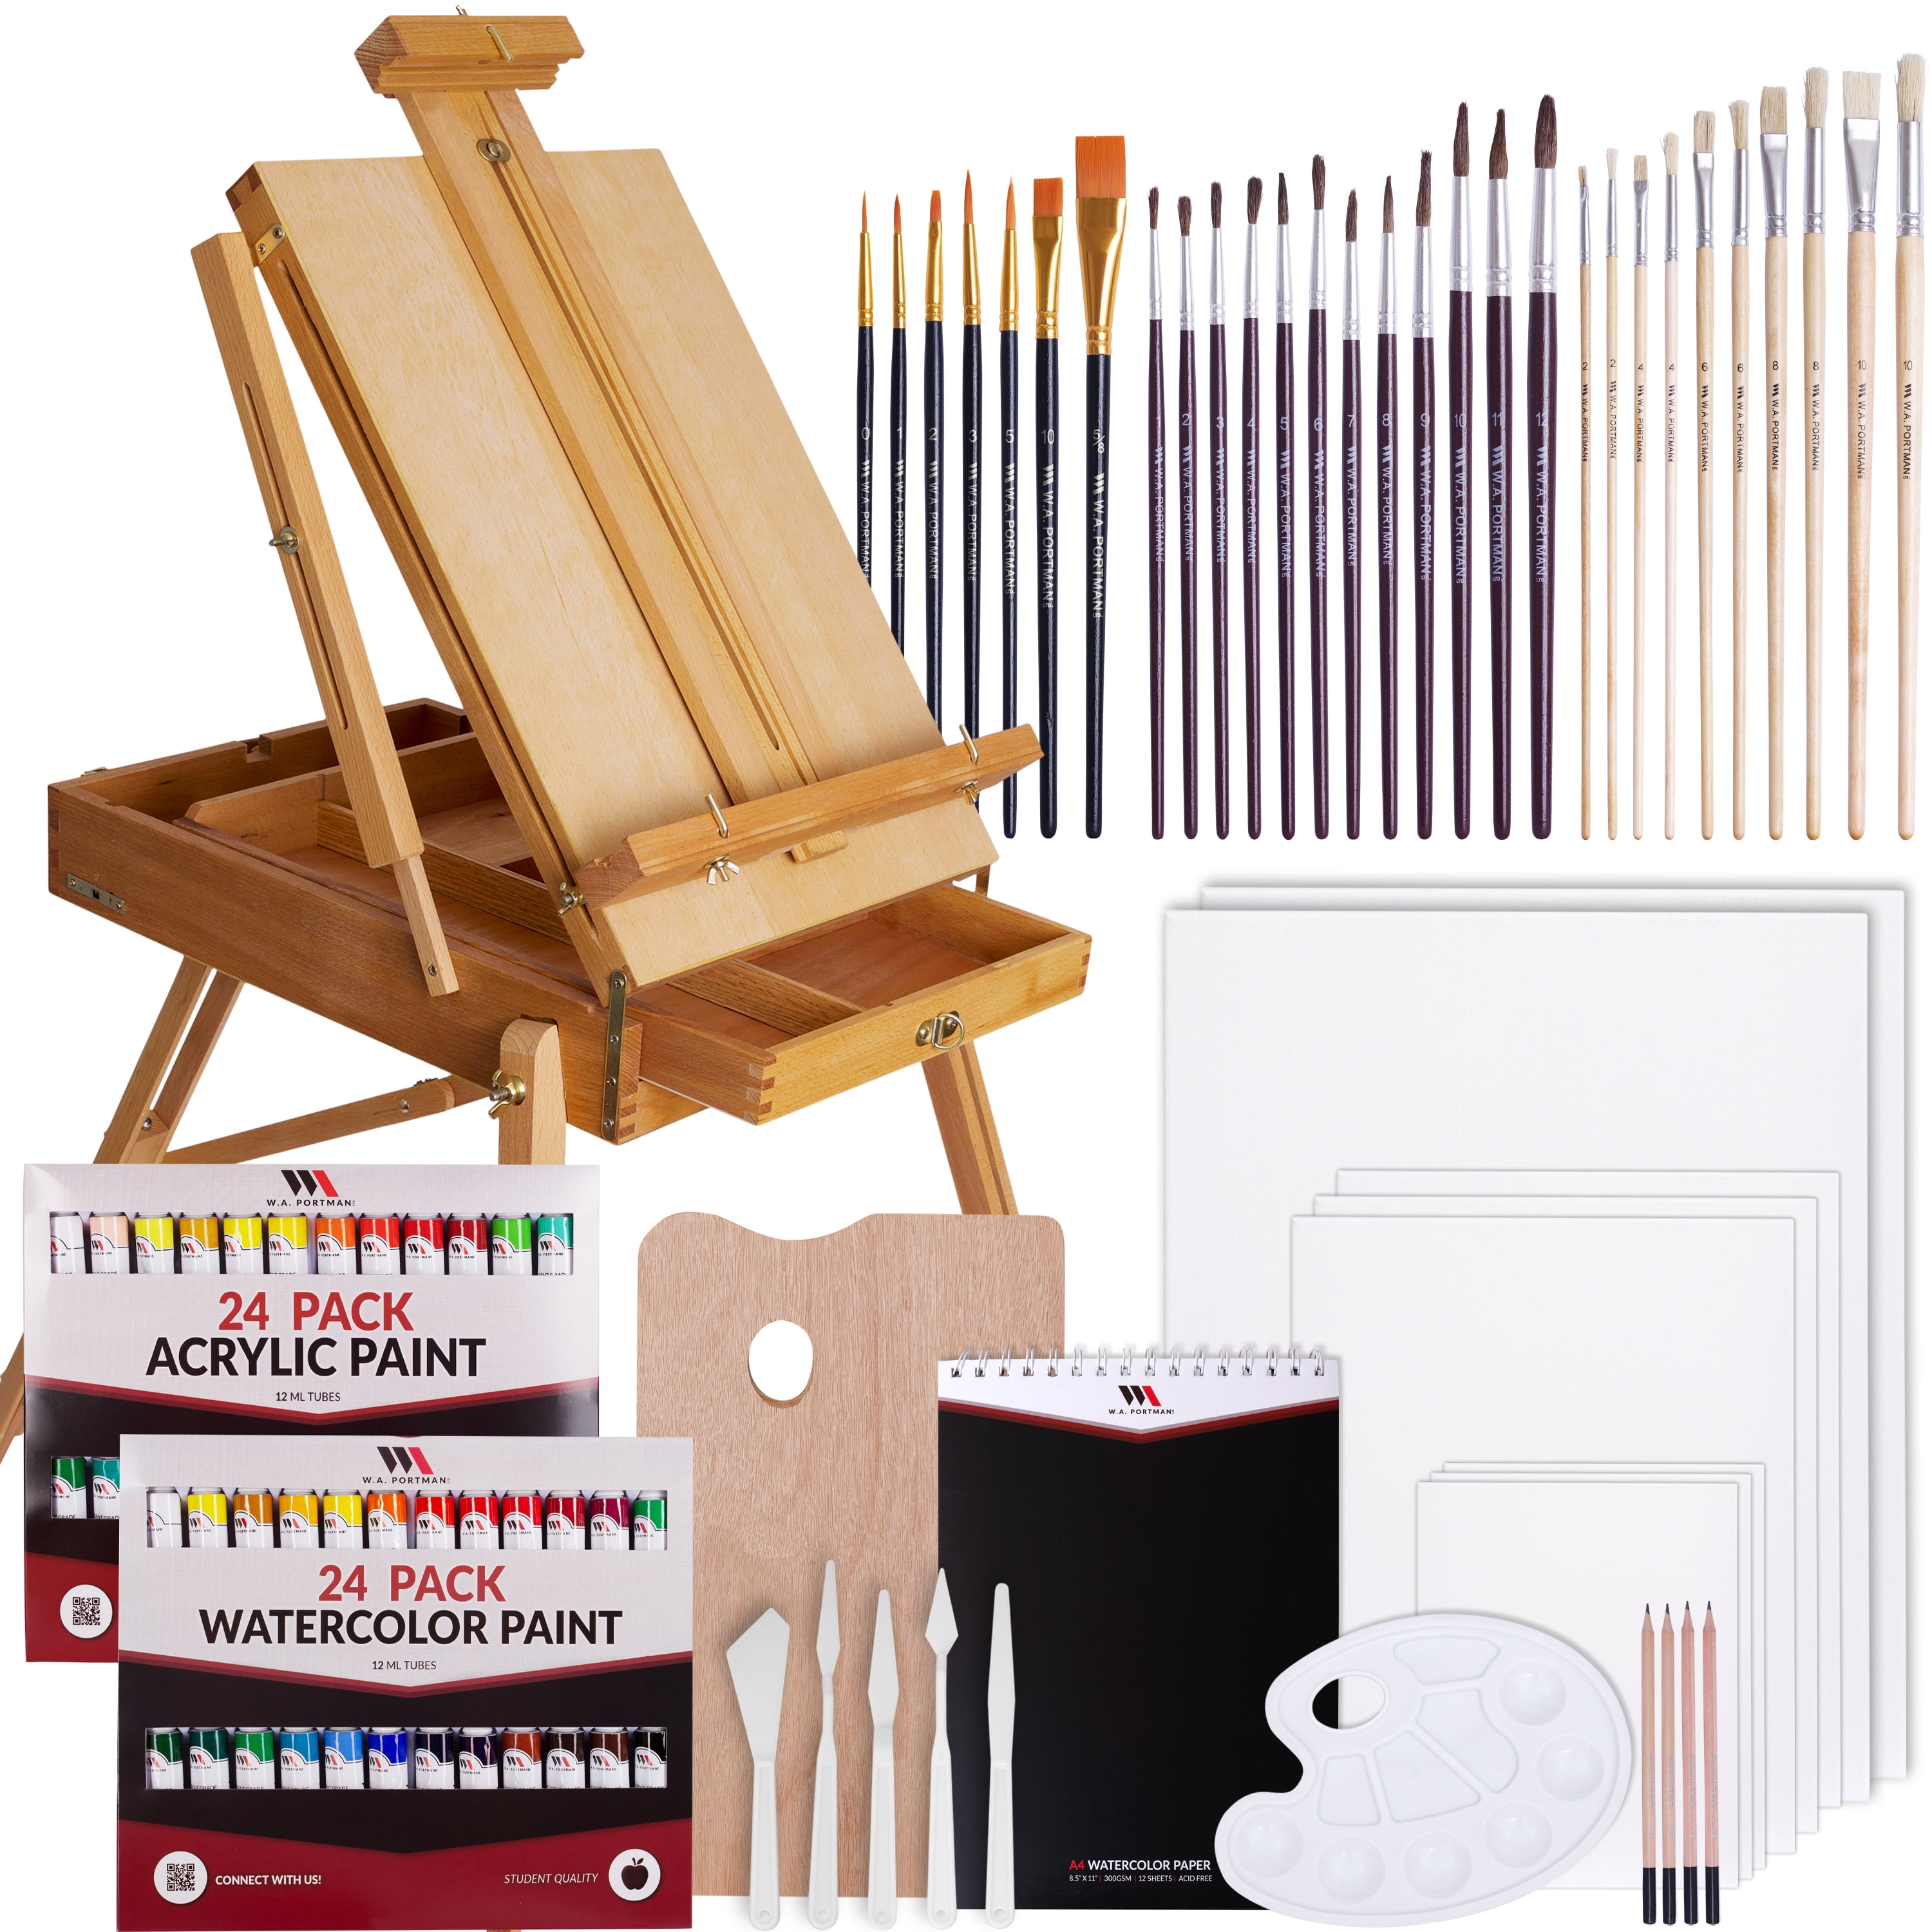 46-Piece Complete Artist Painting Set with Easel - 12 Acrylic & 12